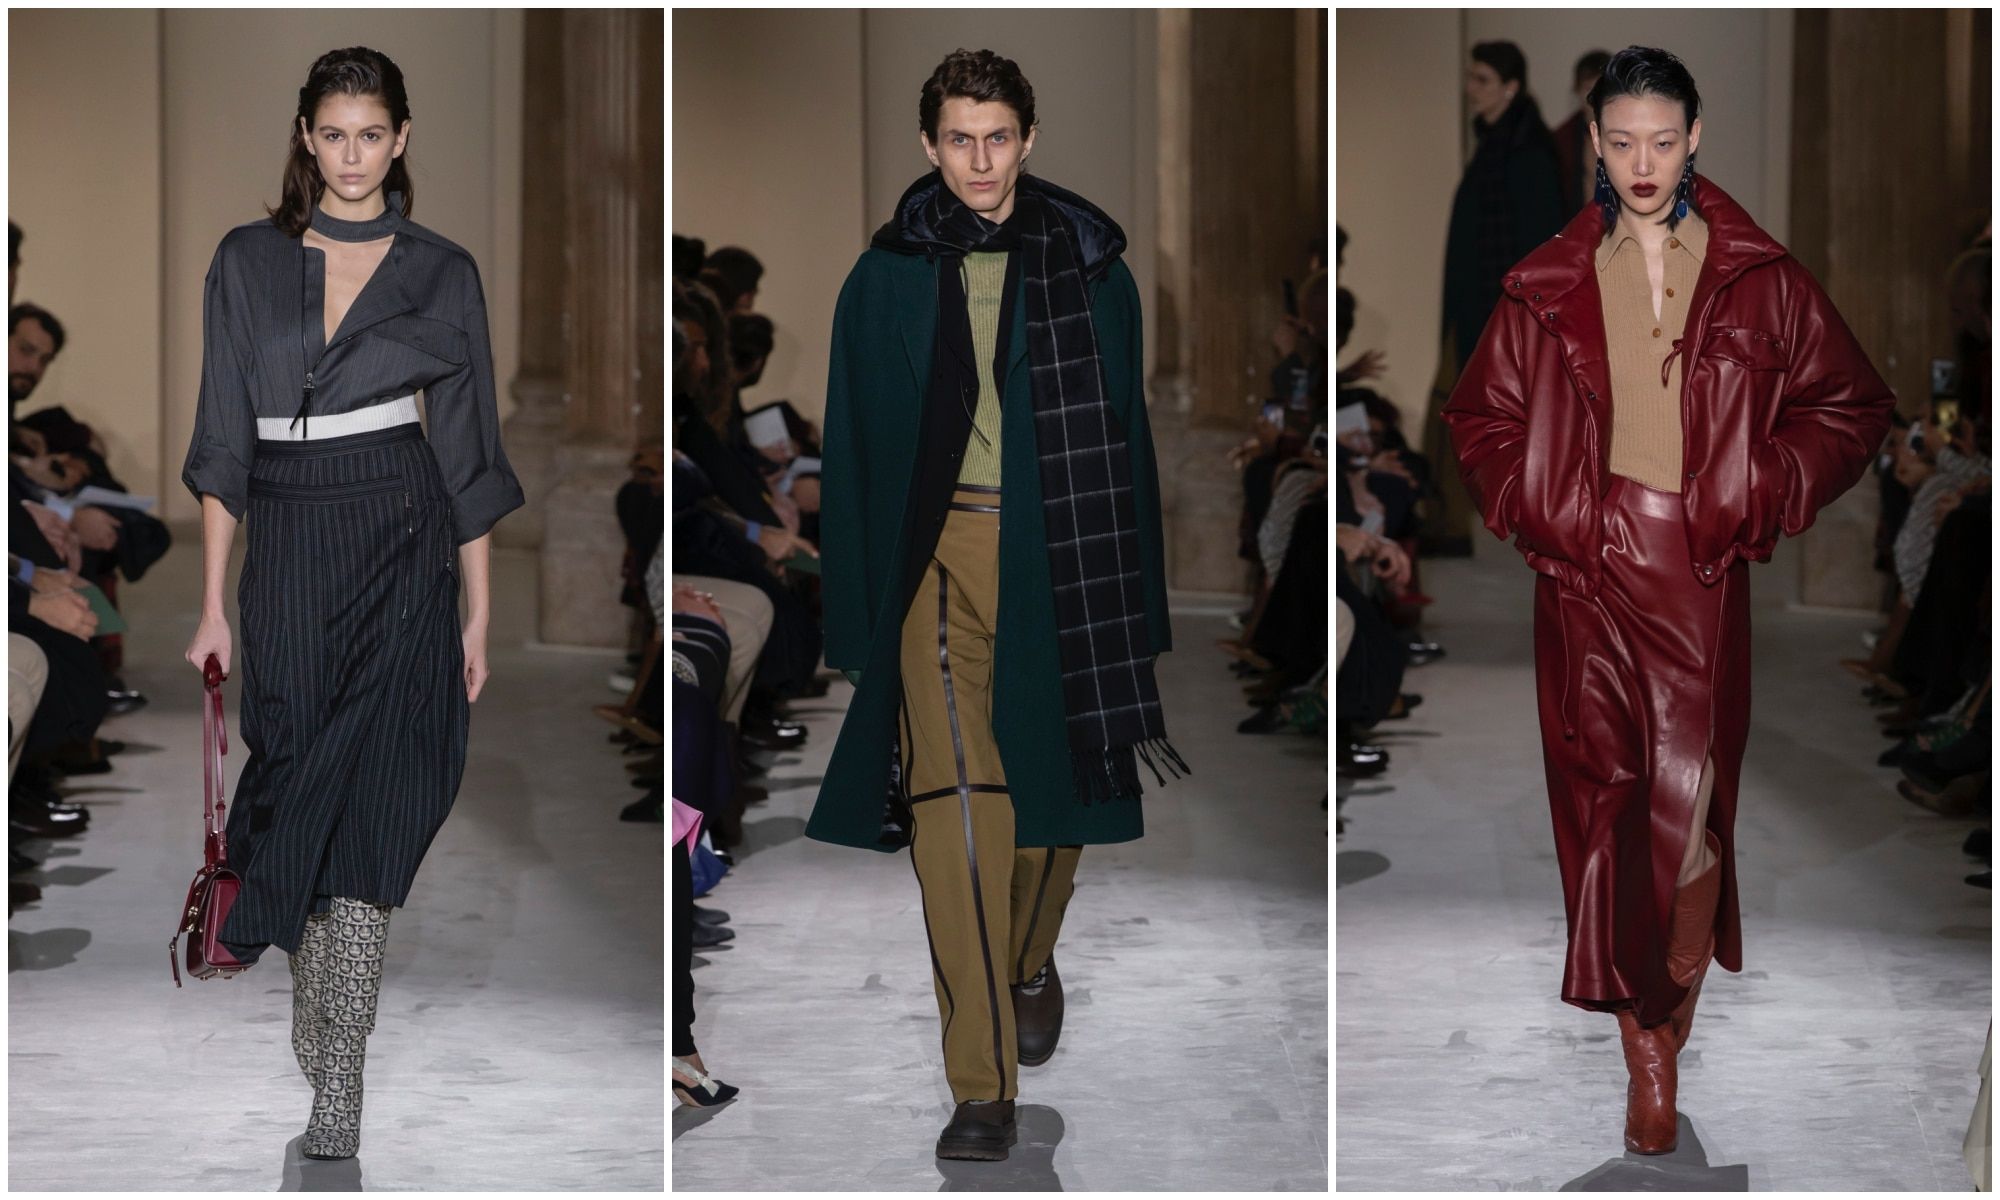 First look: Paul Andrew's Salvatore Ferragamo collection debut as